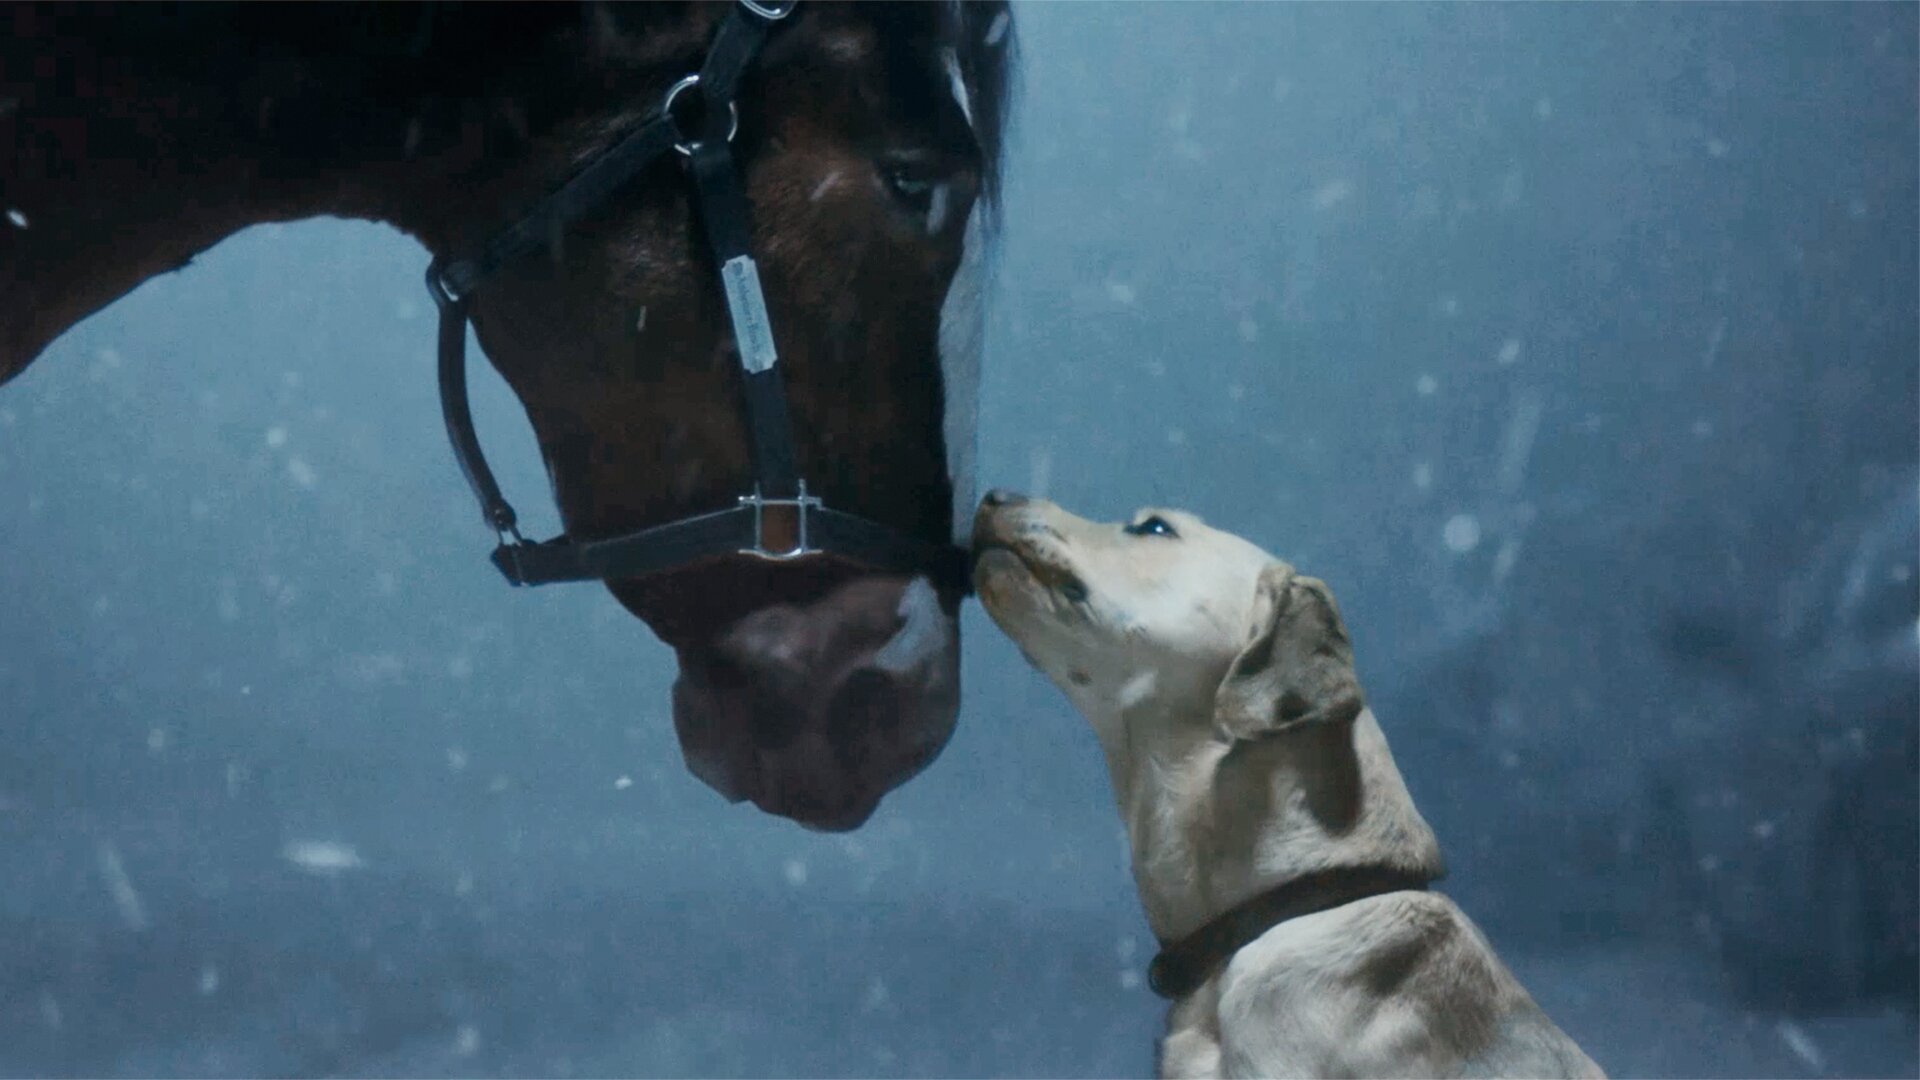 The Iconic Budweiser Clydesdales Deliver OnScreen Magic in Brand’s